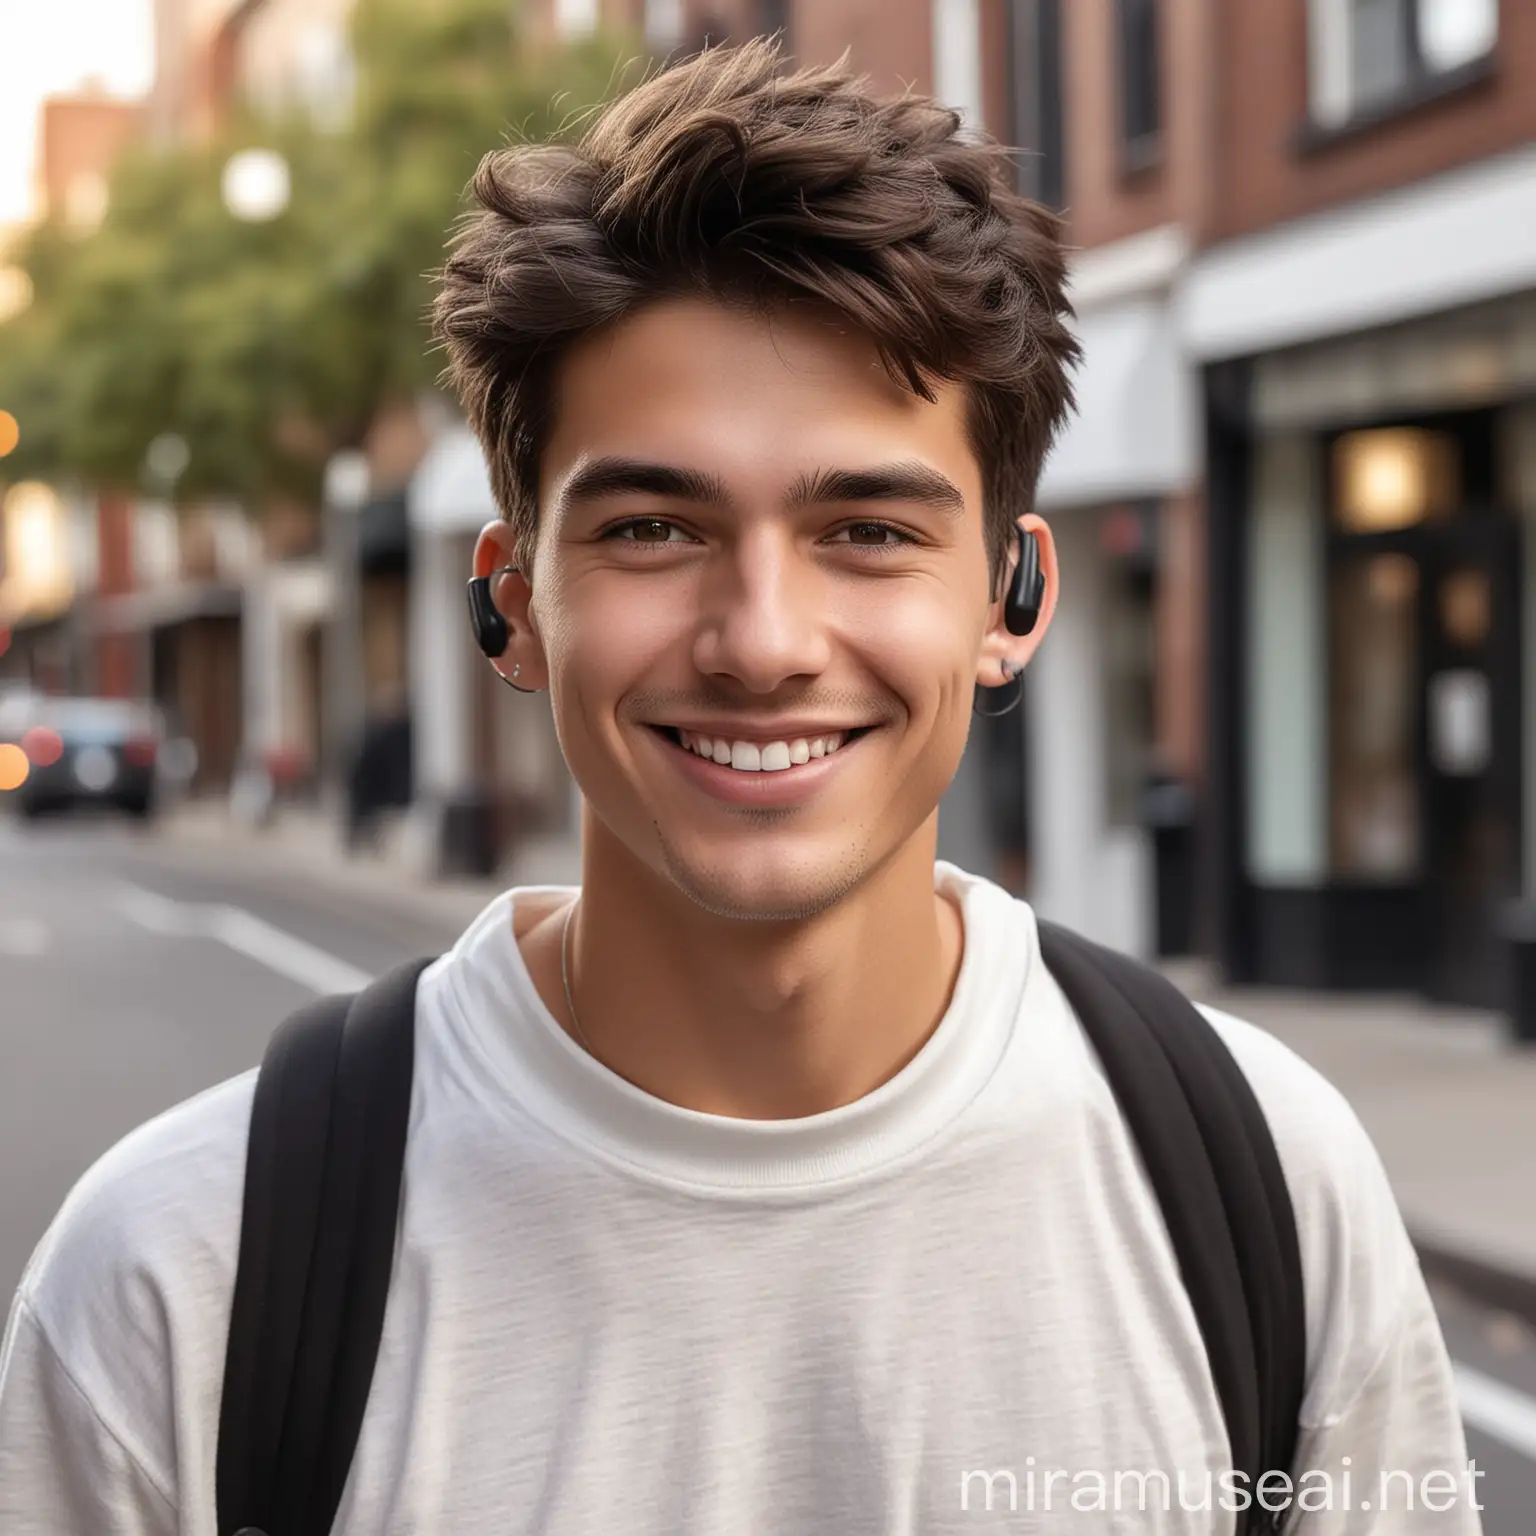 Confident College Student Walking with Bluetooth Airpods